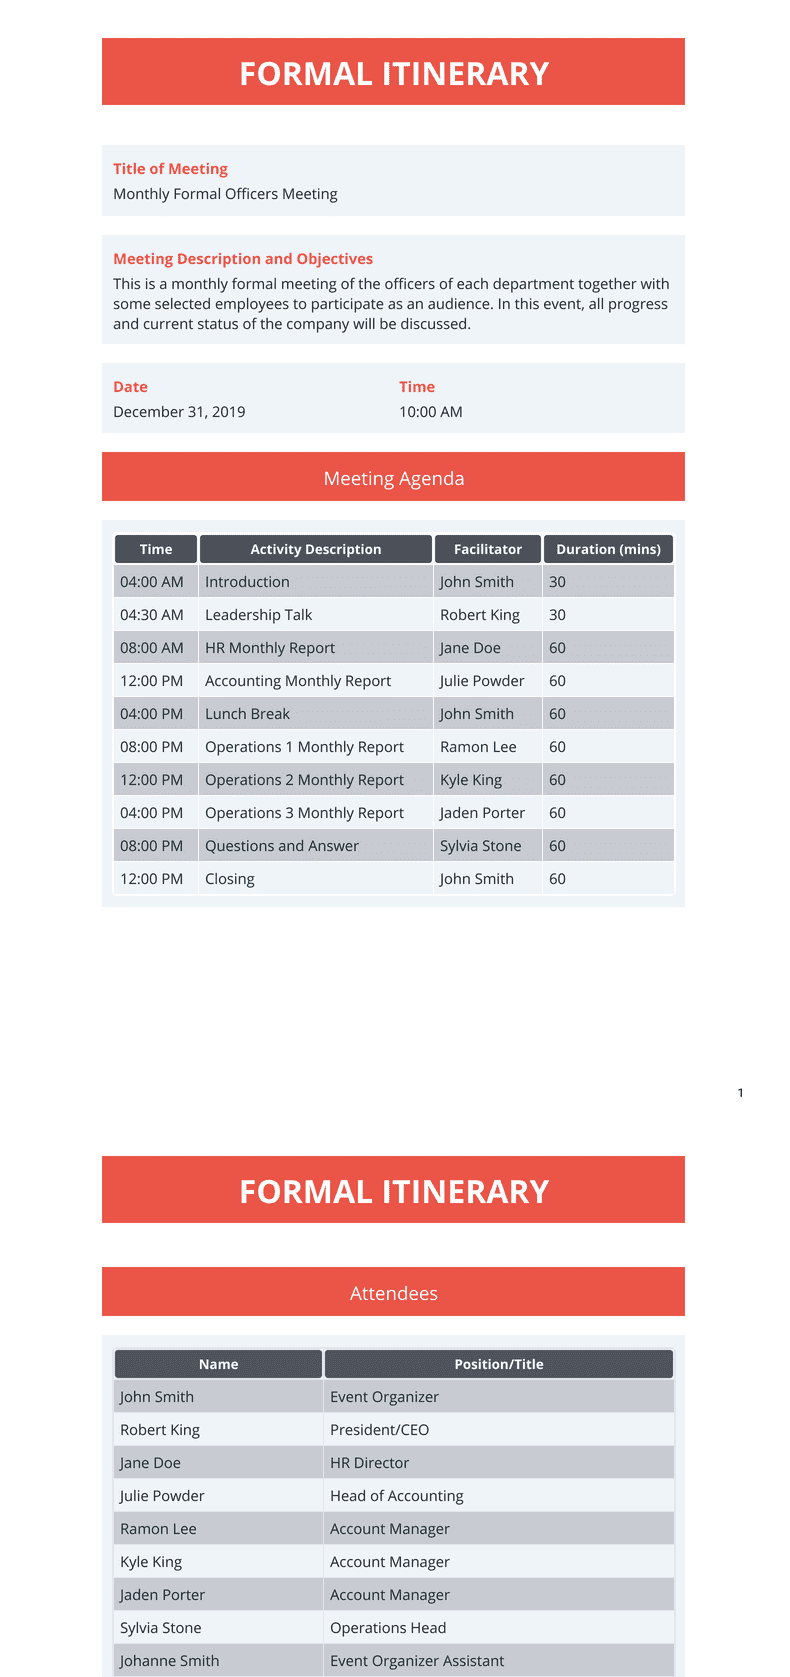 PDF Templates: Formal Itinerary Template